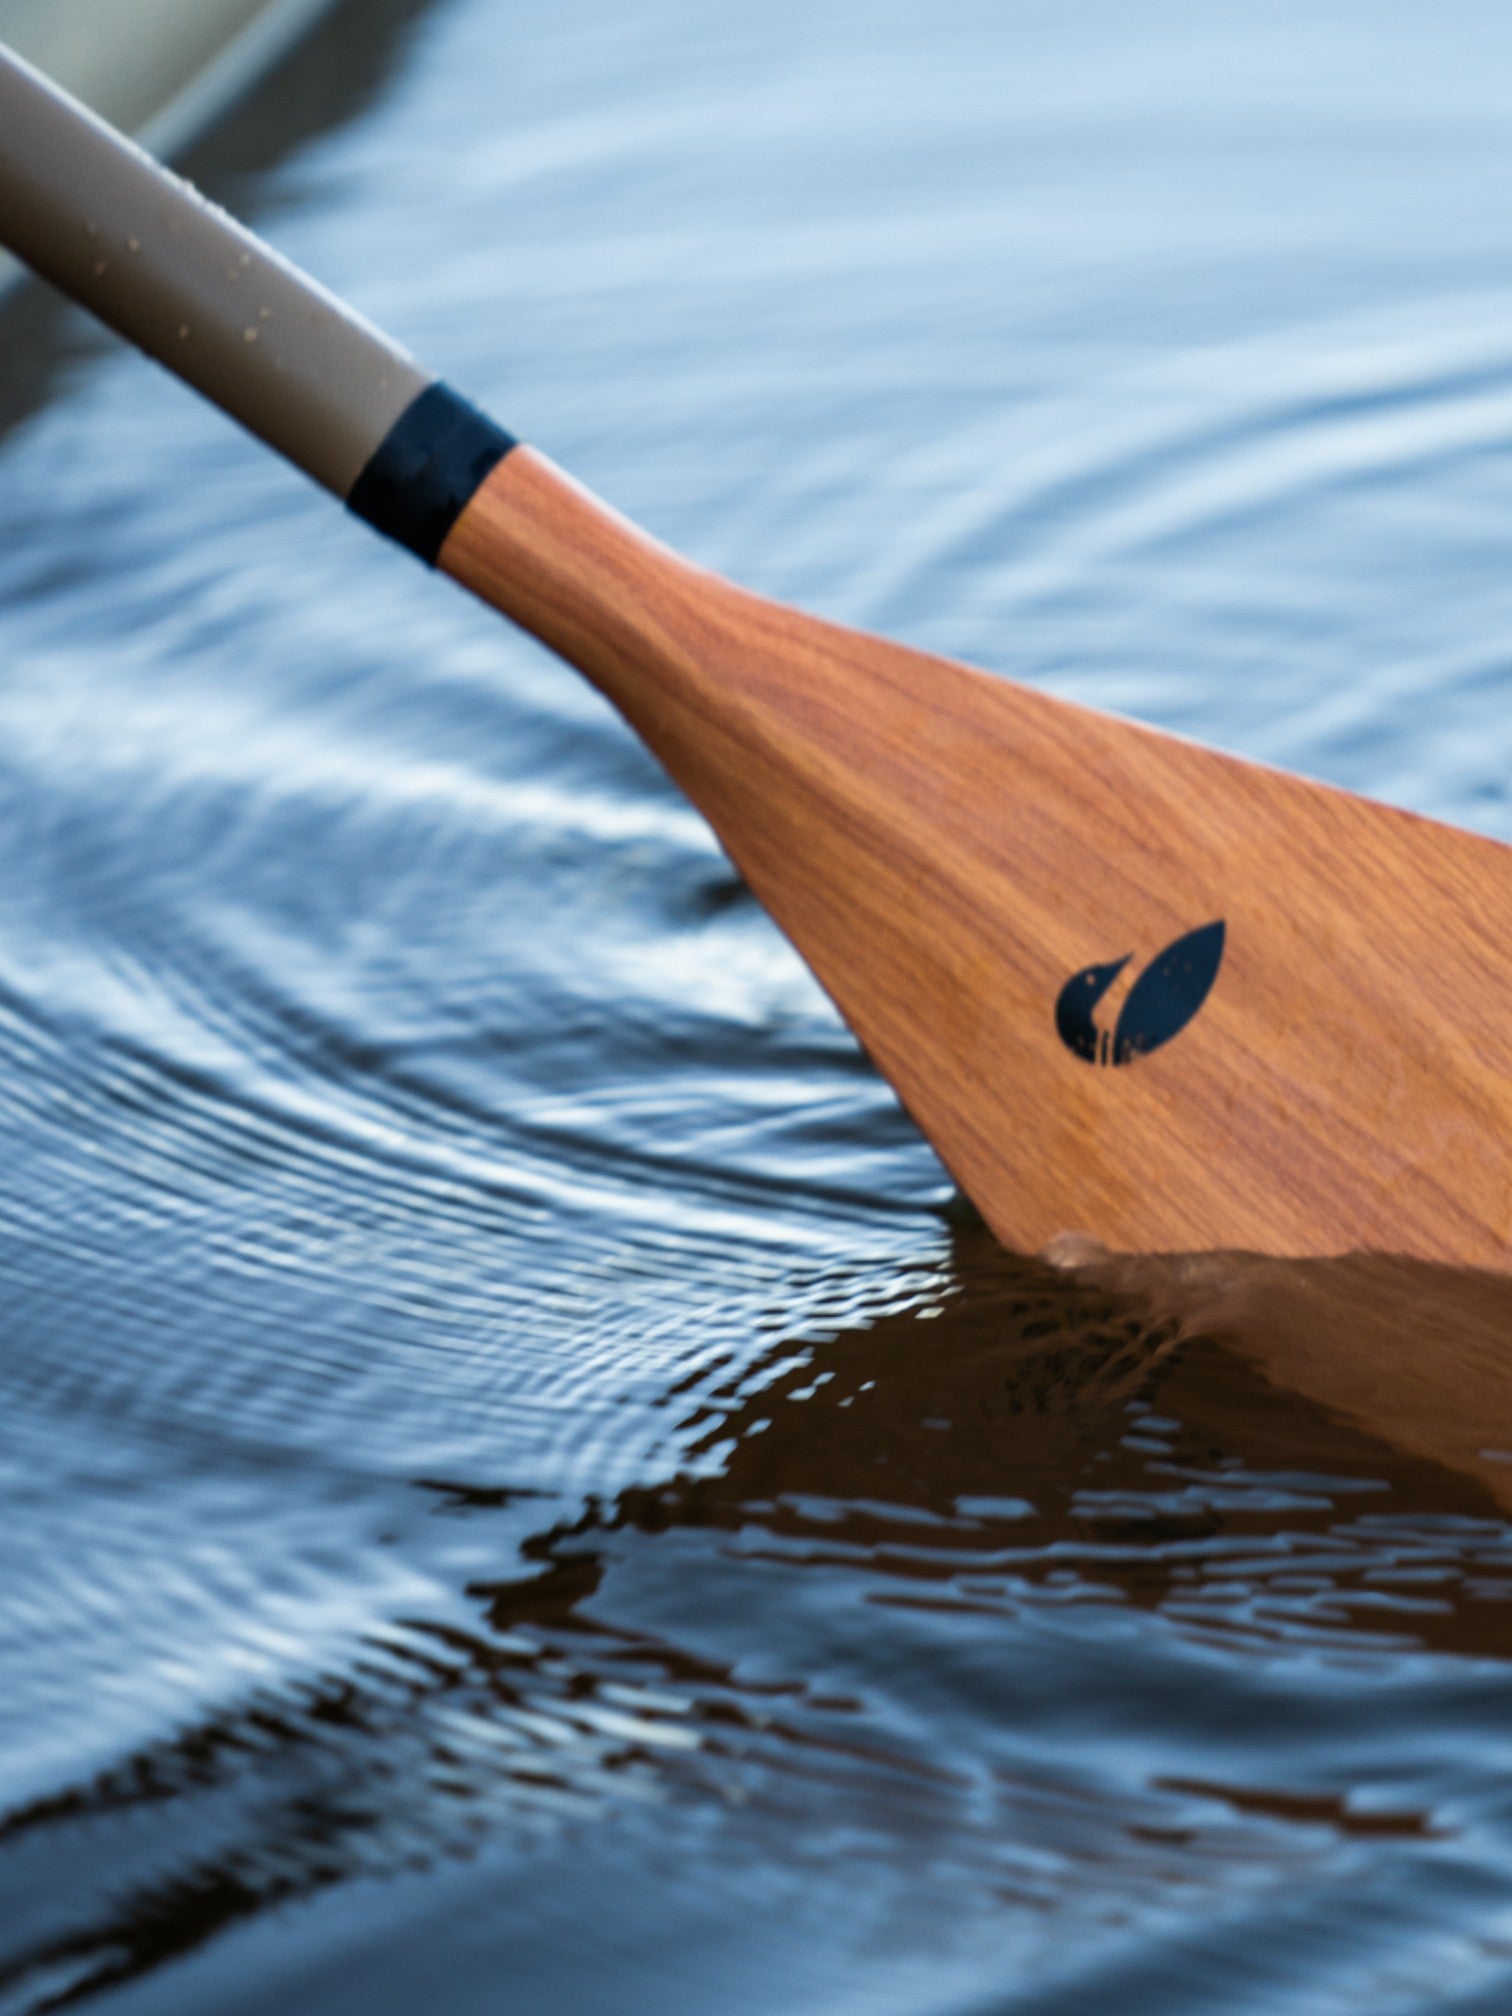 Bamboo paddle in the water.